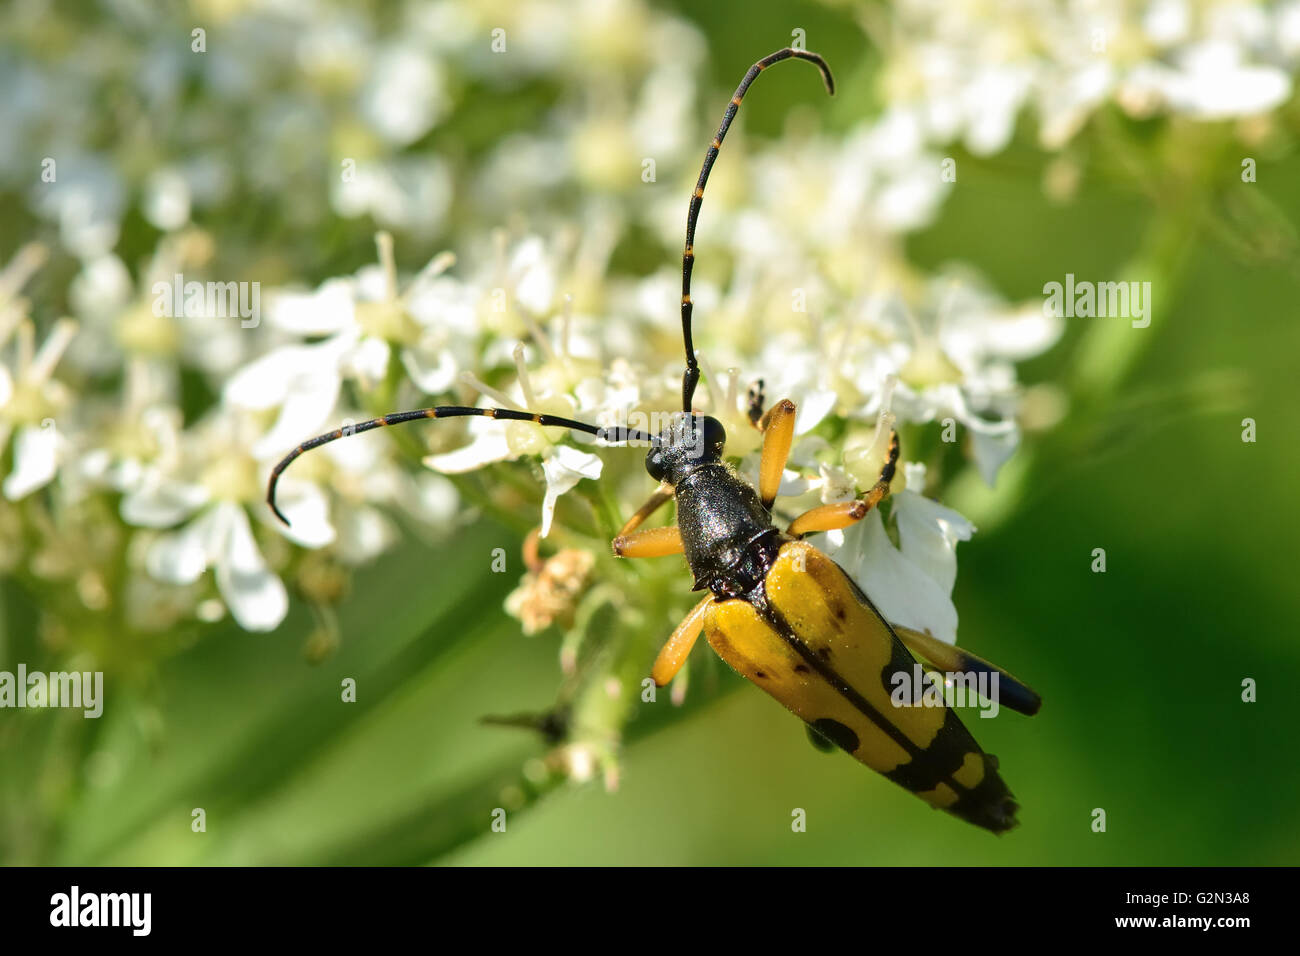 Spotted longhorn beetle (Rutpela maculata) nectaring. Yellow and black insect in the family Cerambycidae, with long antennae Stock Photo